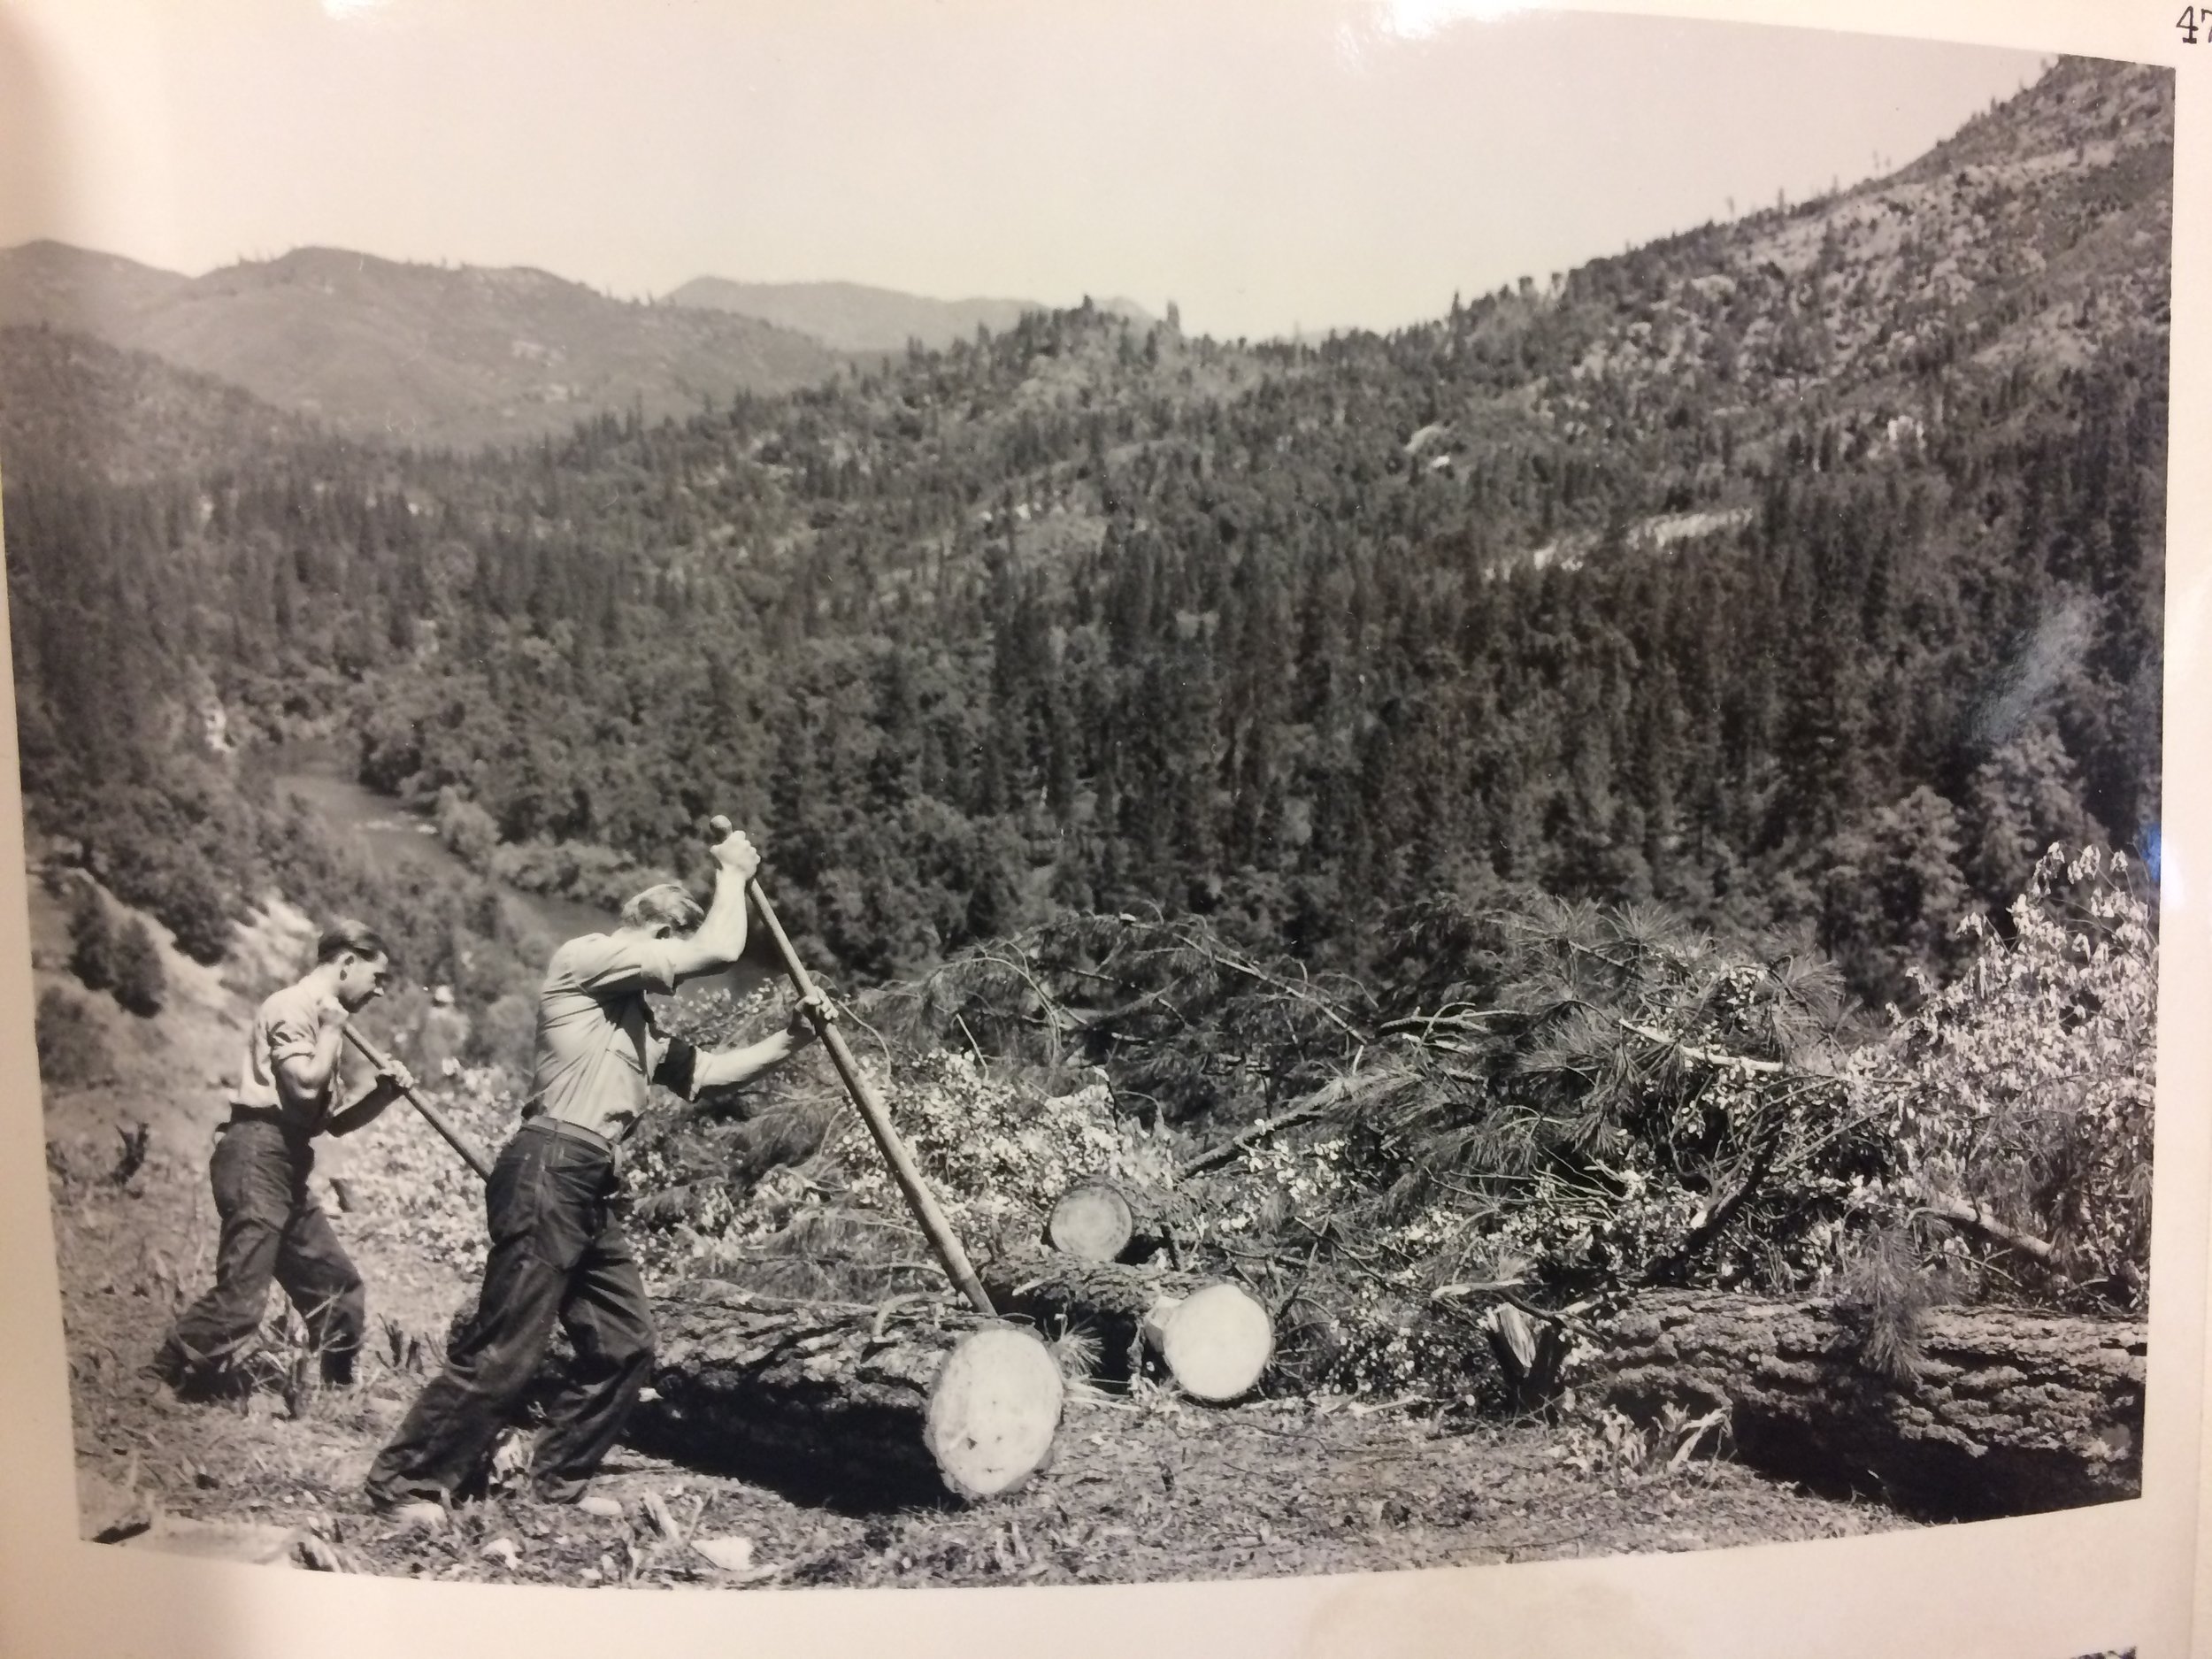  Workers from the Civilian Conservation Corps cut, piled and burned land in the McCloud River Canyon to prepare for the future Shasta Reservoir. Photo: U.S. National Archives and Records Administration 